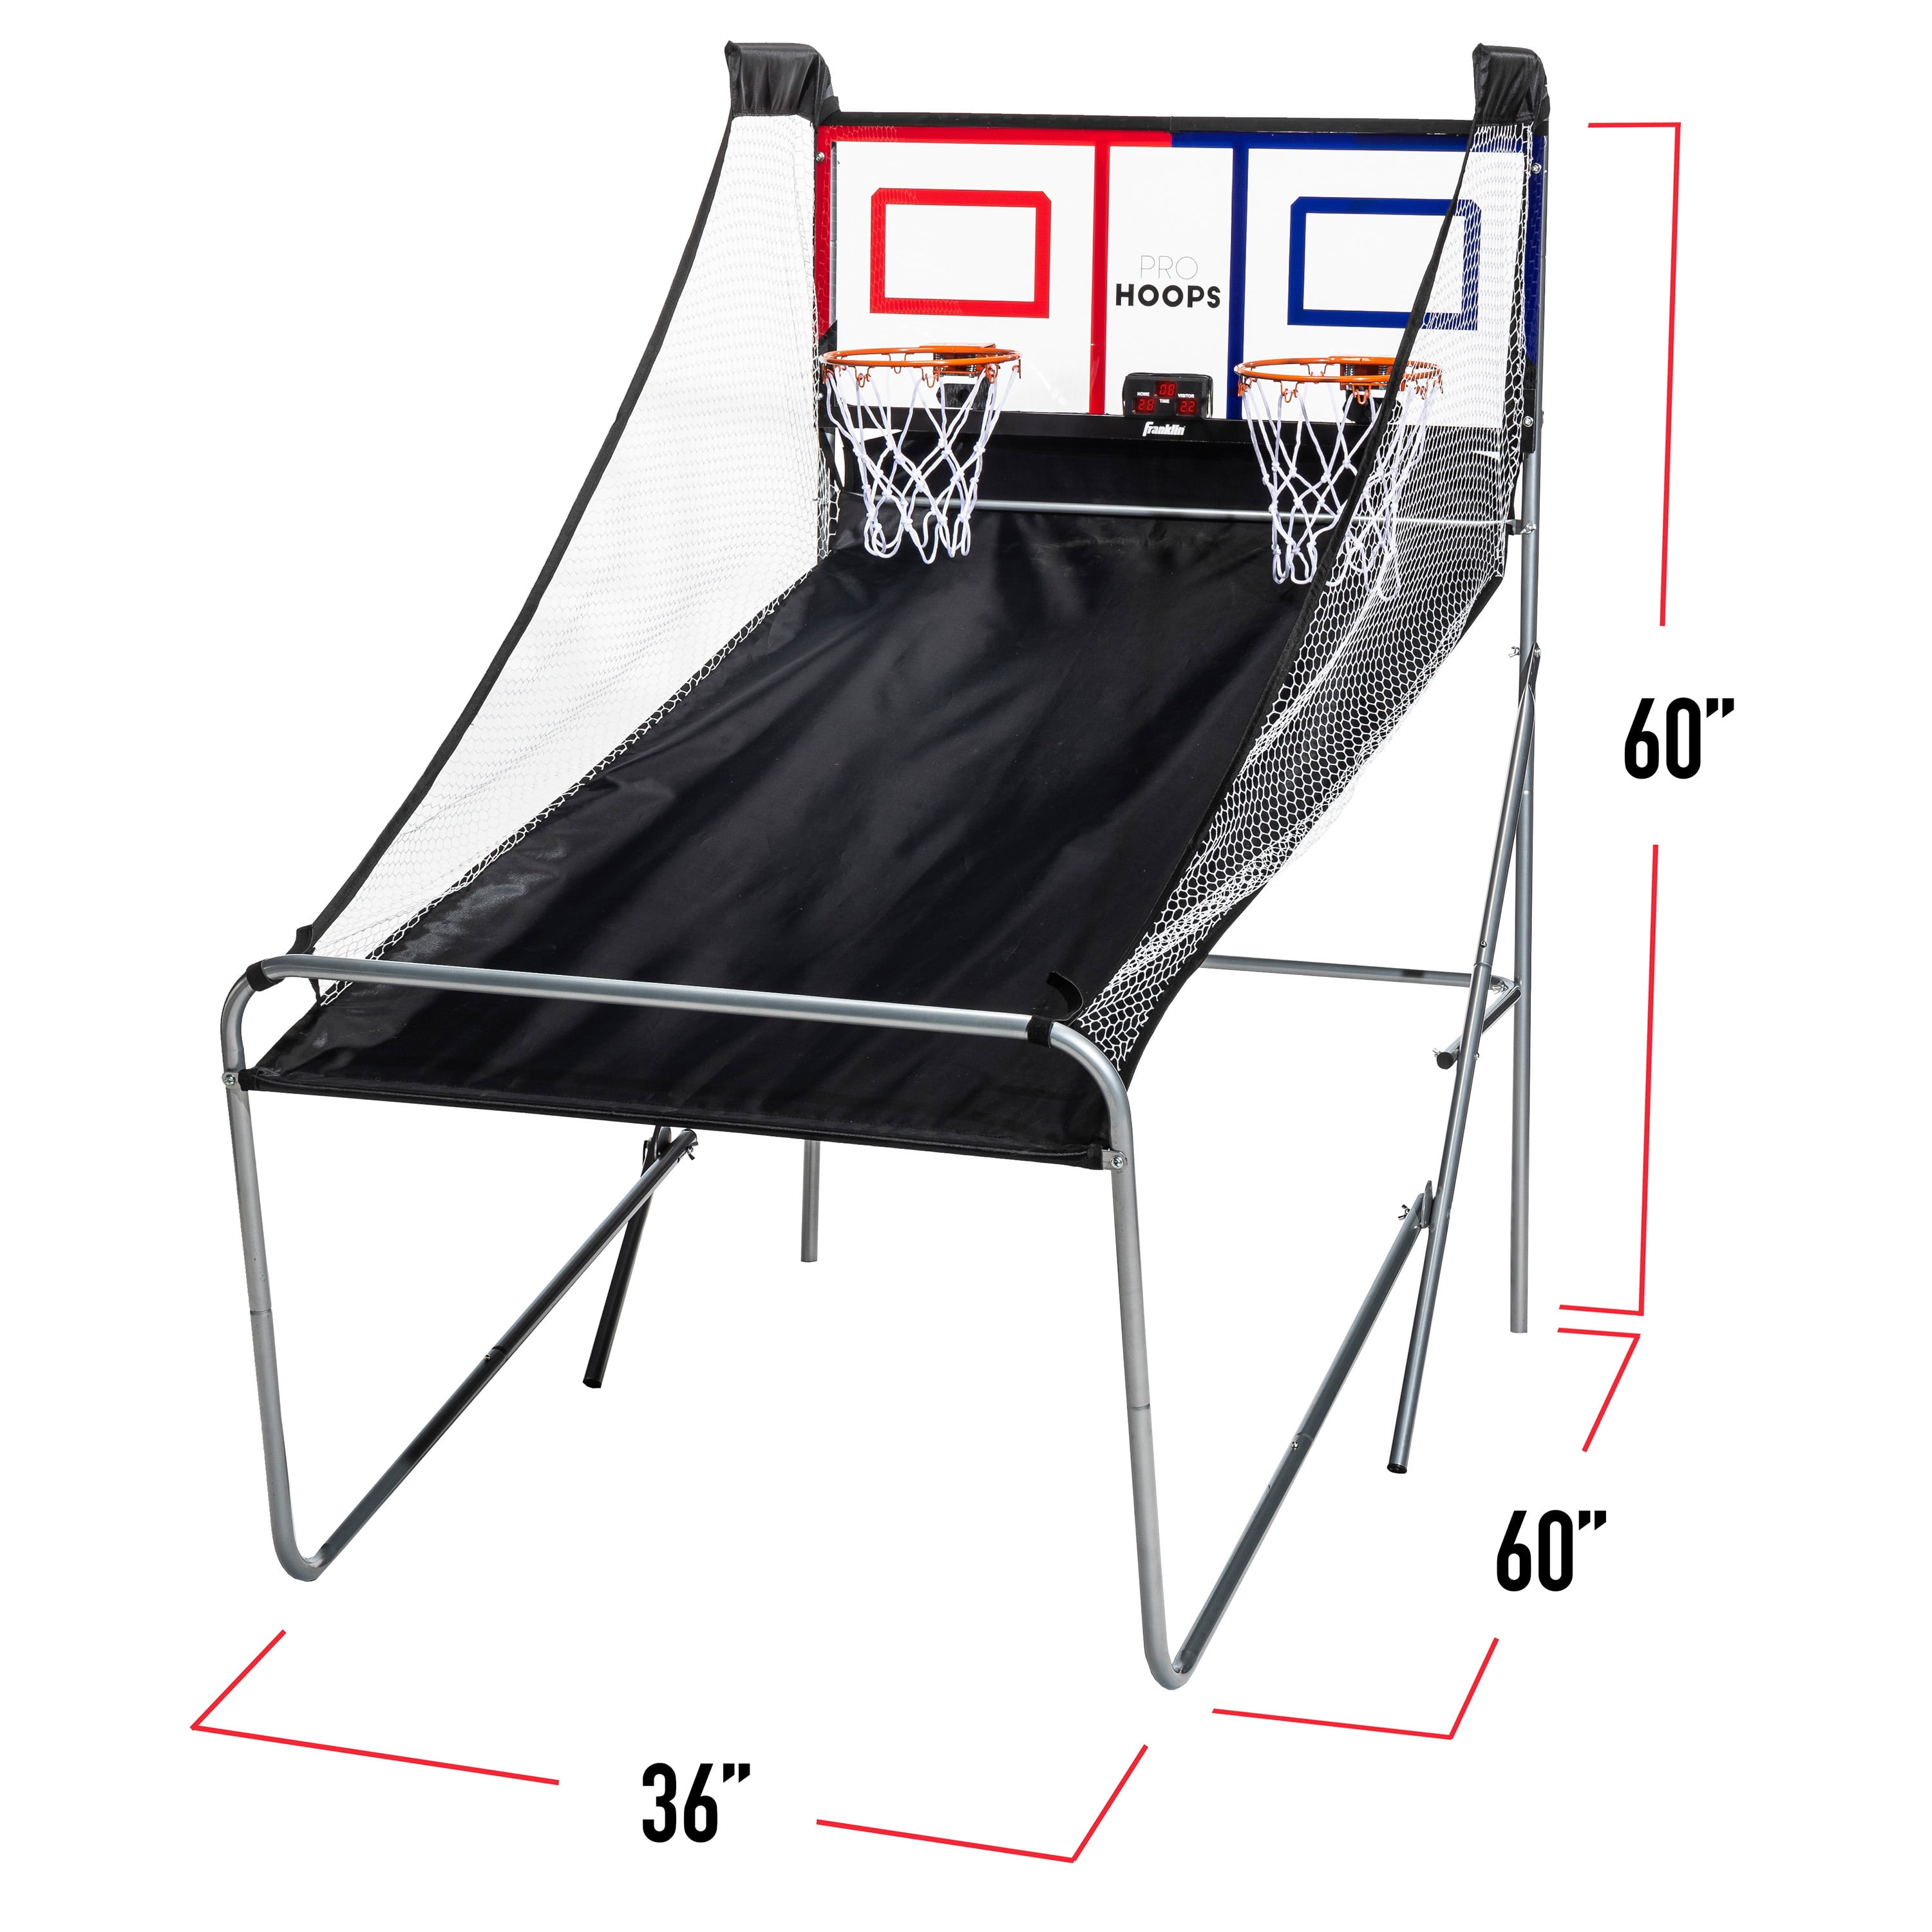 Franklin Sports Arcade Basketball - Indoor Basketball Shootout - 2 Players  - Includes Electronic Scoreboard and 4 Mini Basketballs